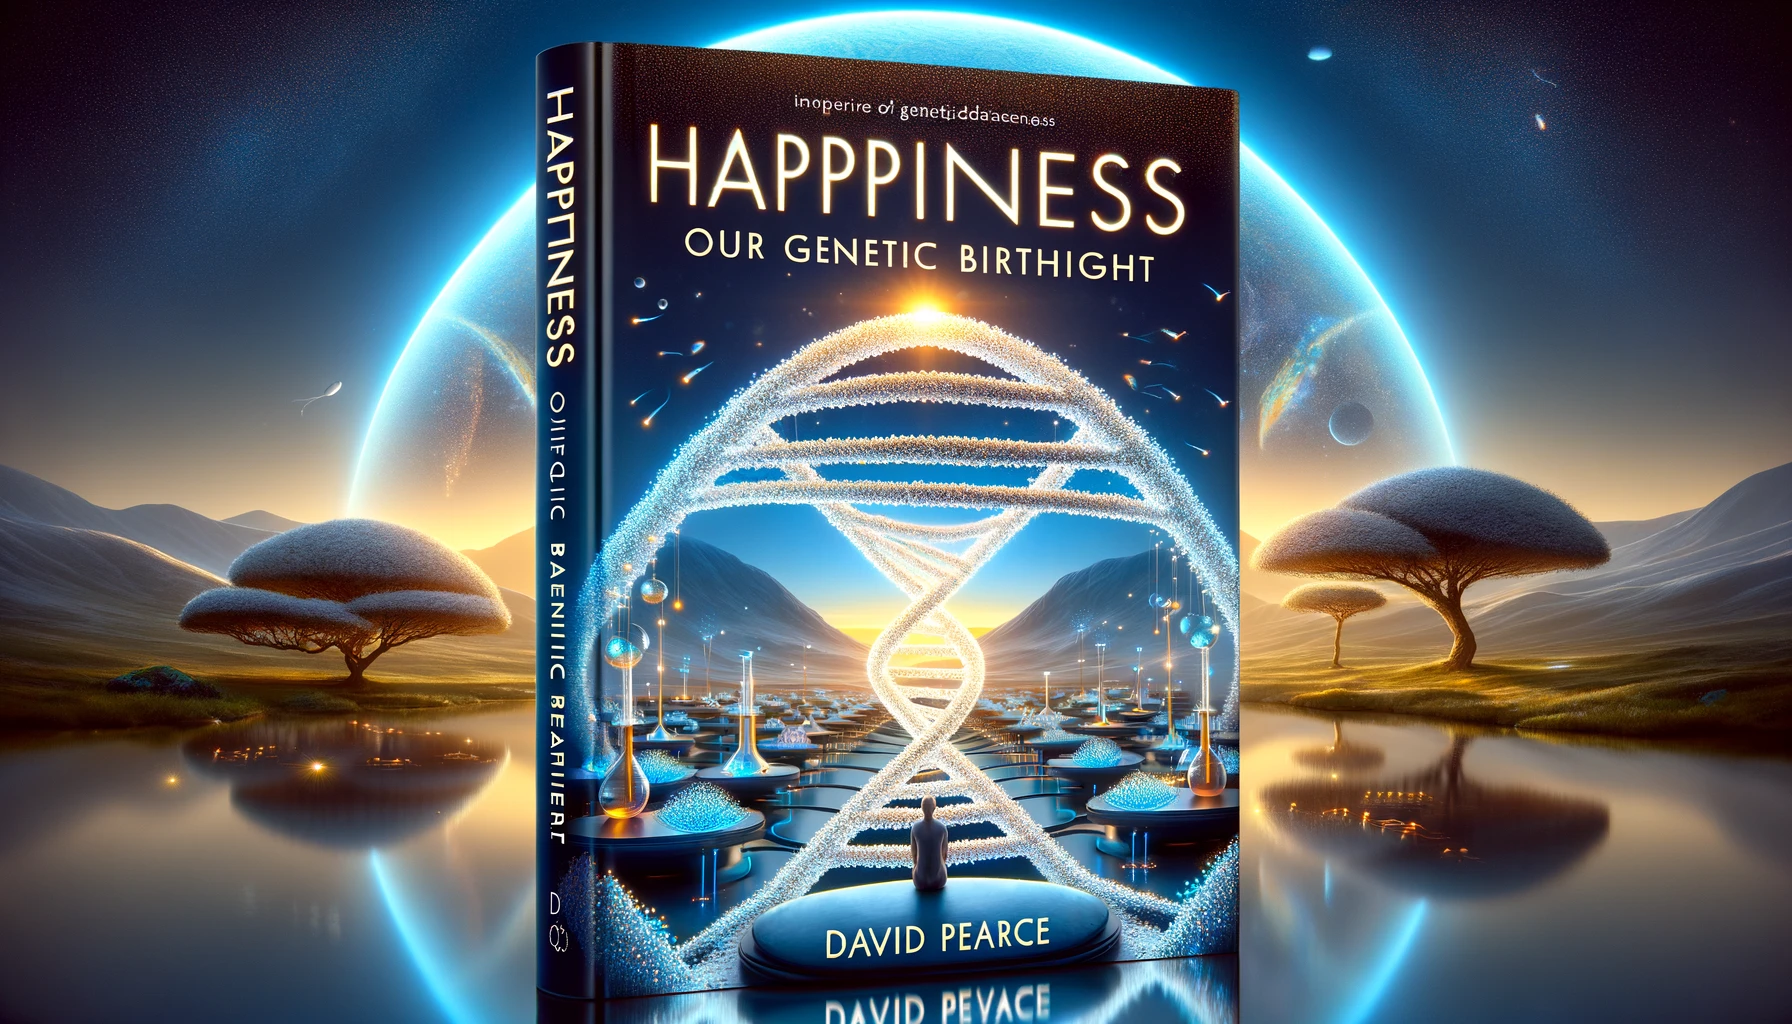 Happiness: Our Genetic Birthright by David Pearce